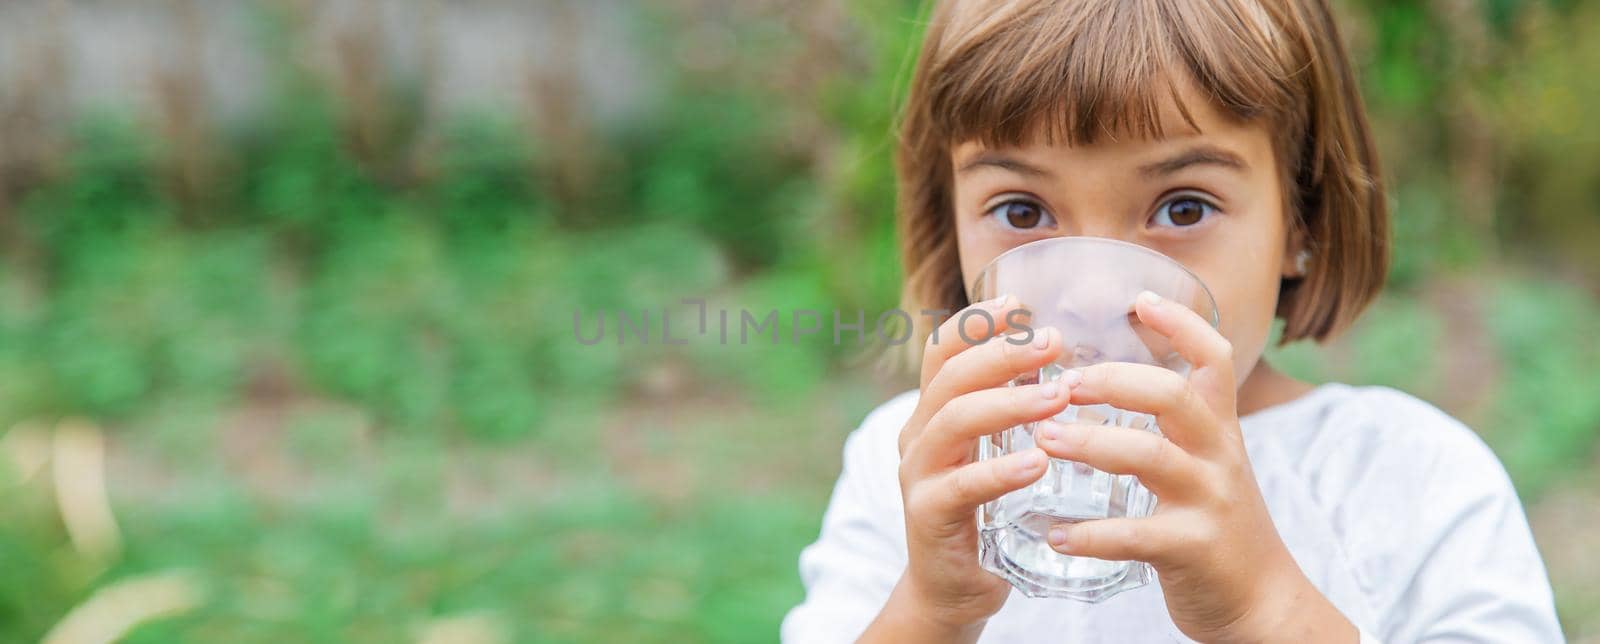 child drinks water from a glass. Selective focus. Kid.